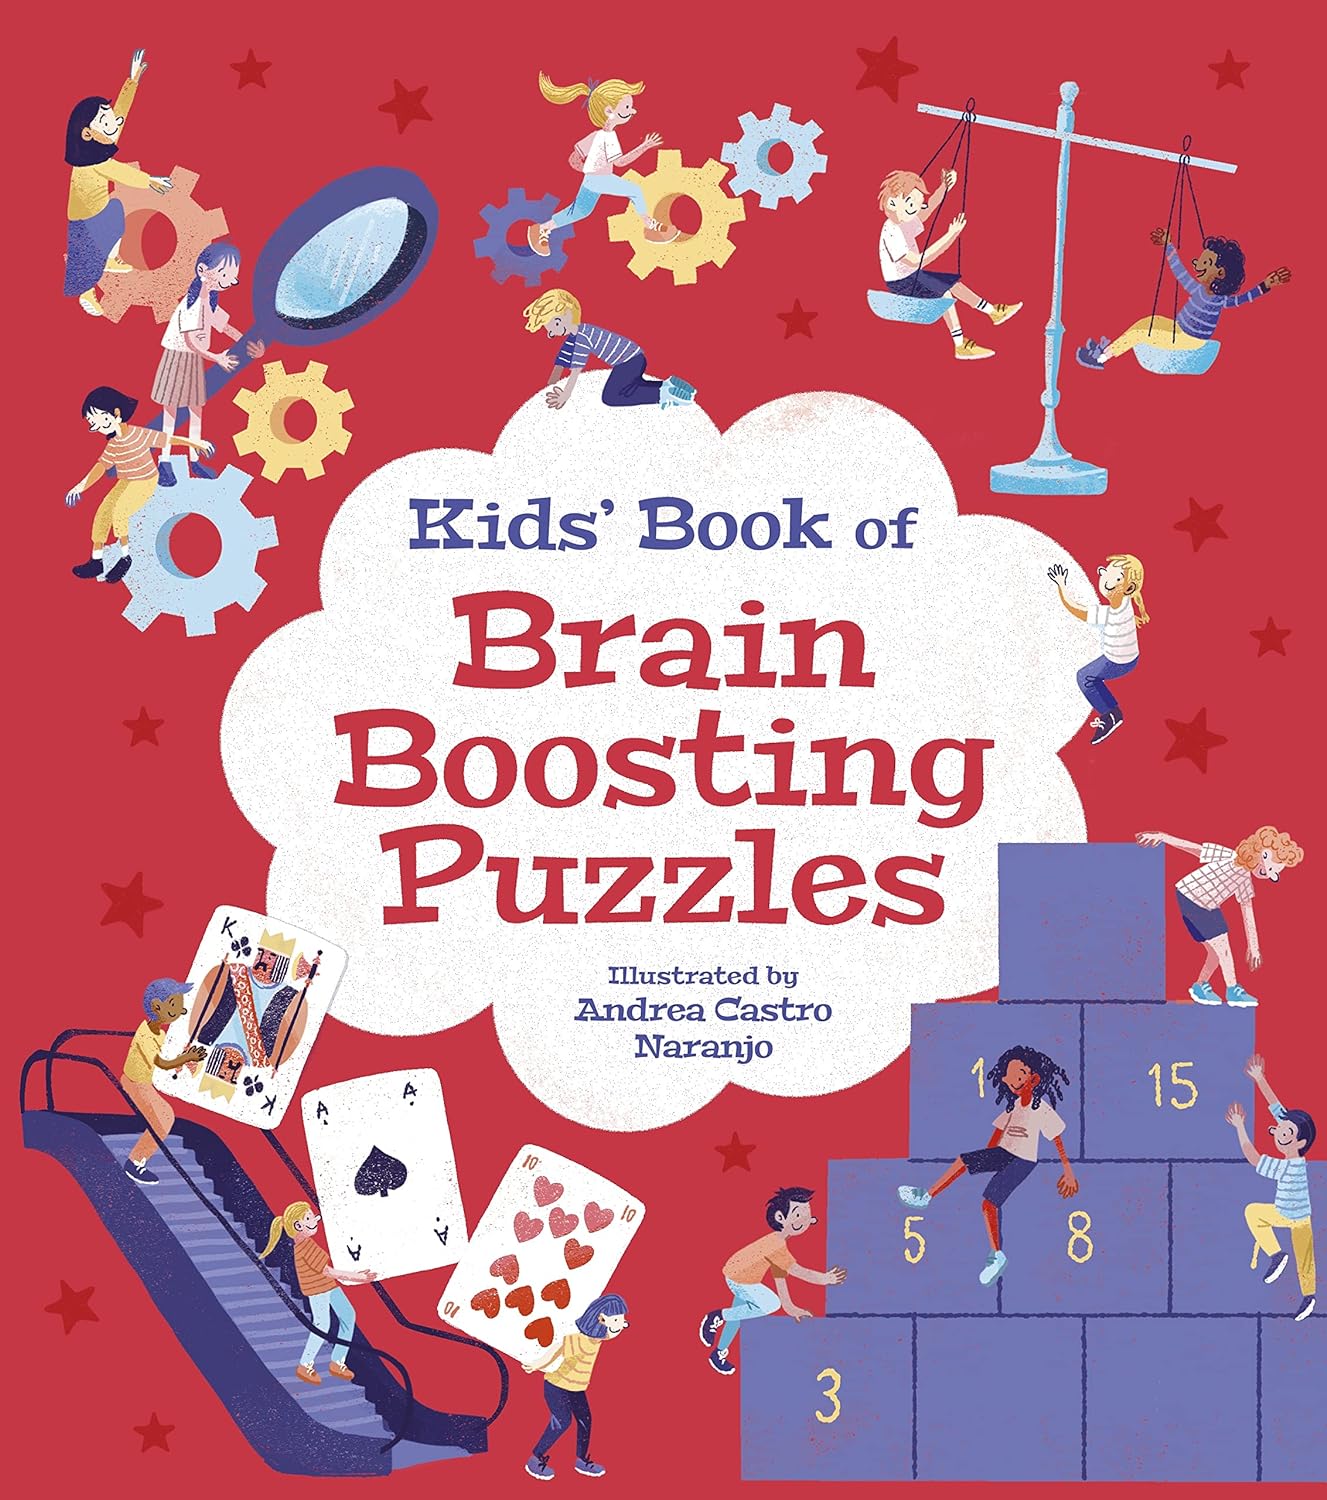 Kid's Book of Brain Boosting Puzzles